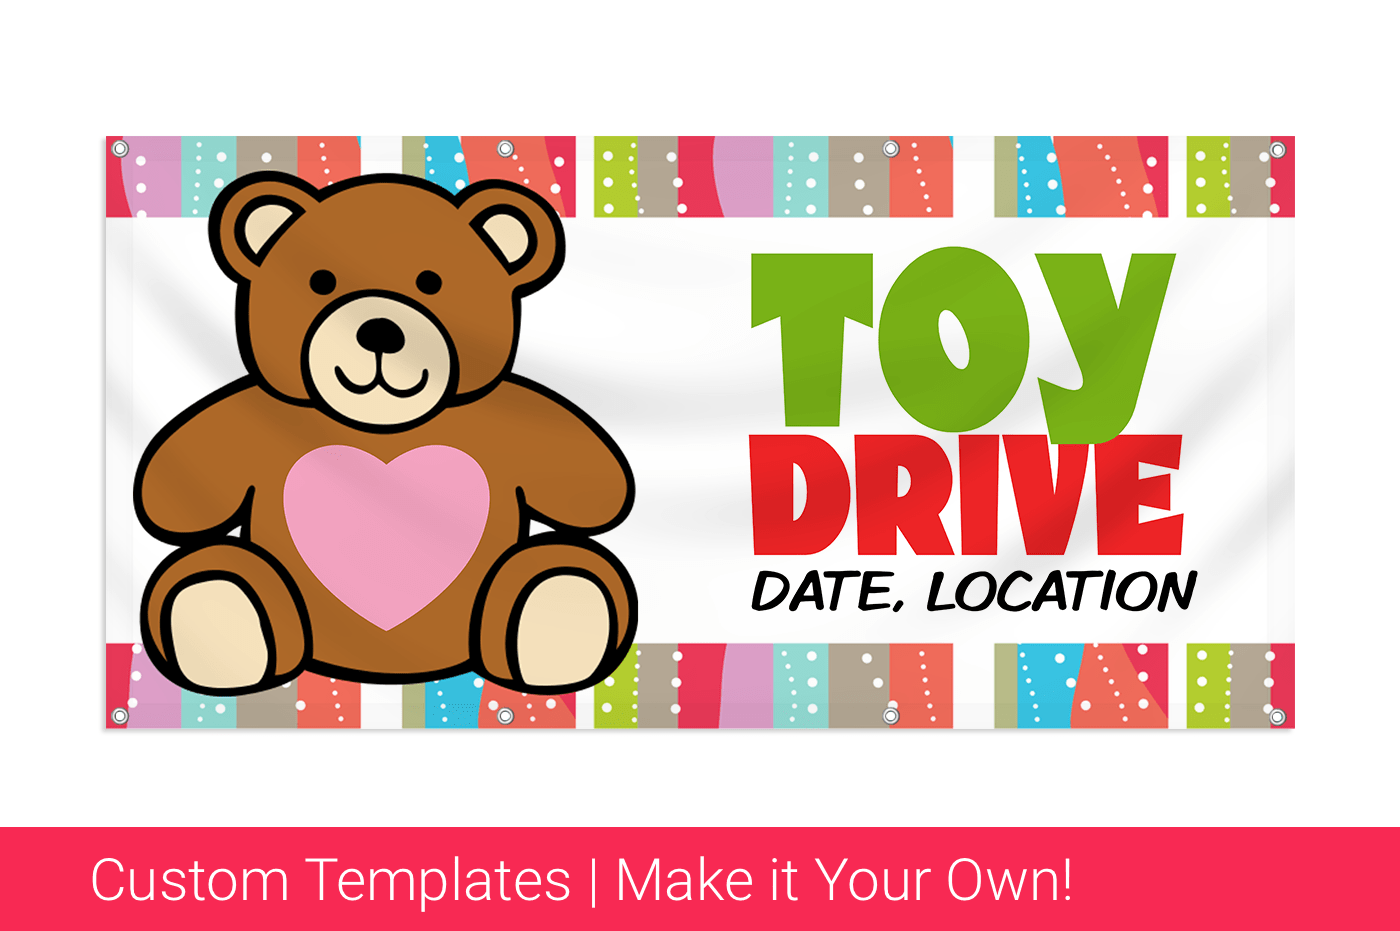 Promote Toy Drives With Customer Banners